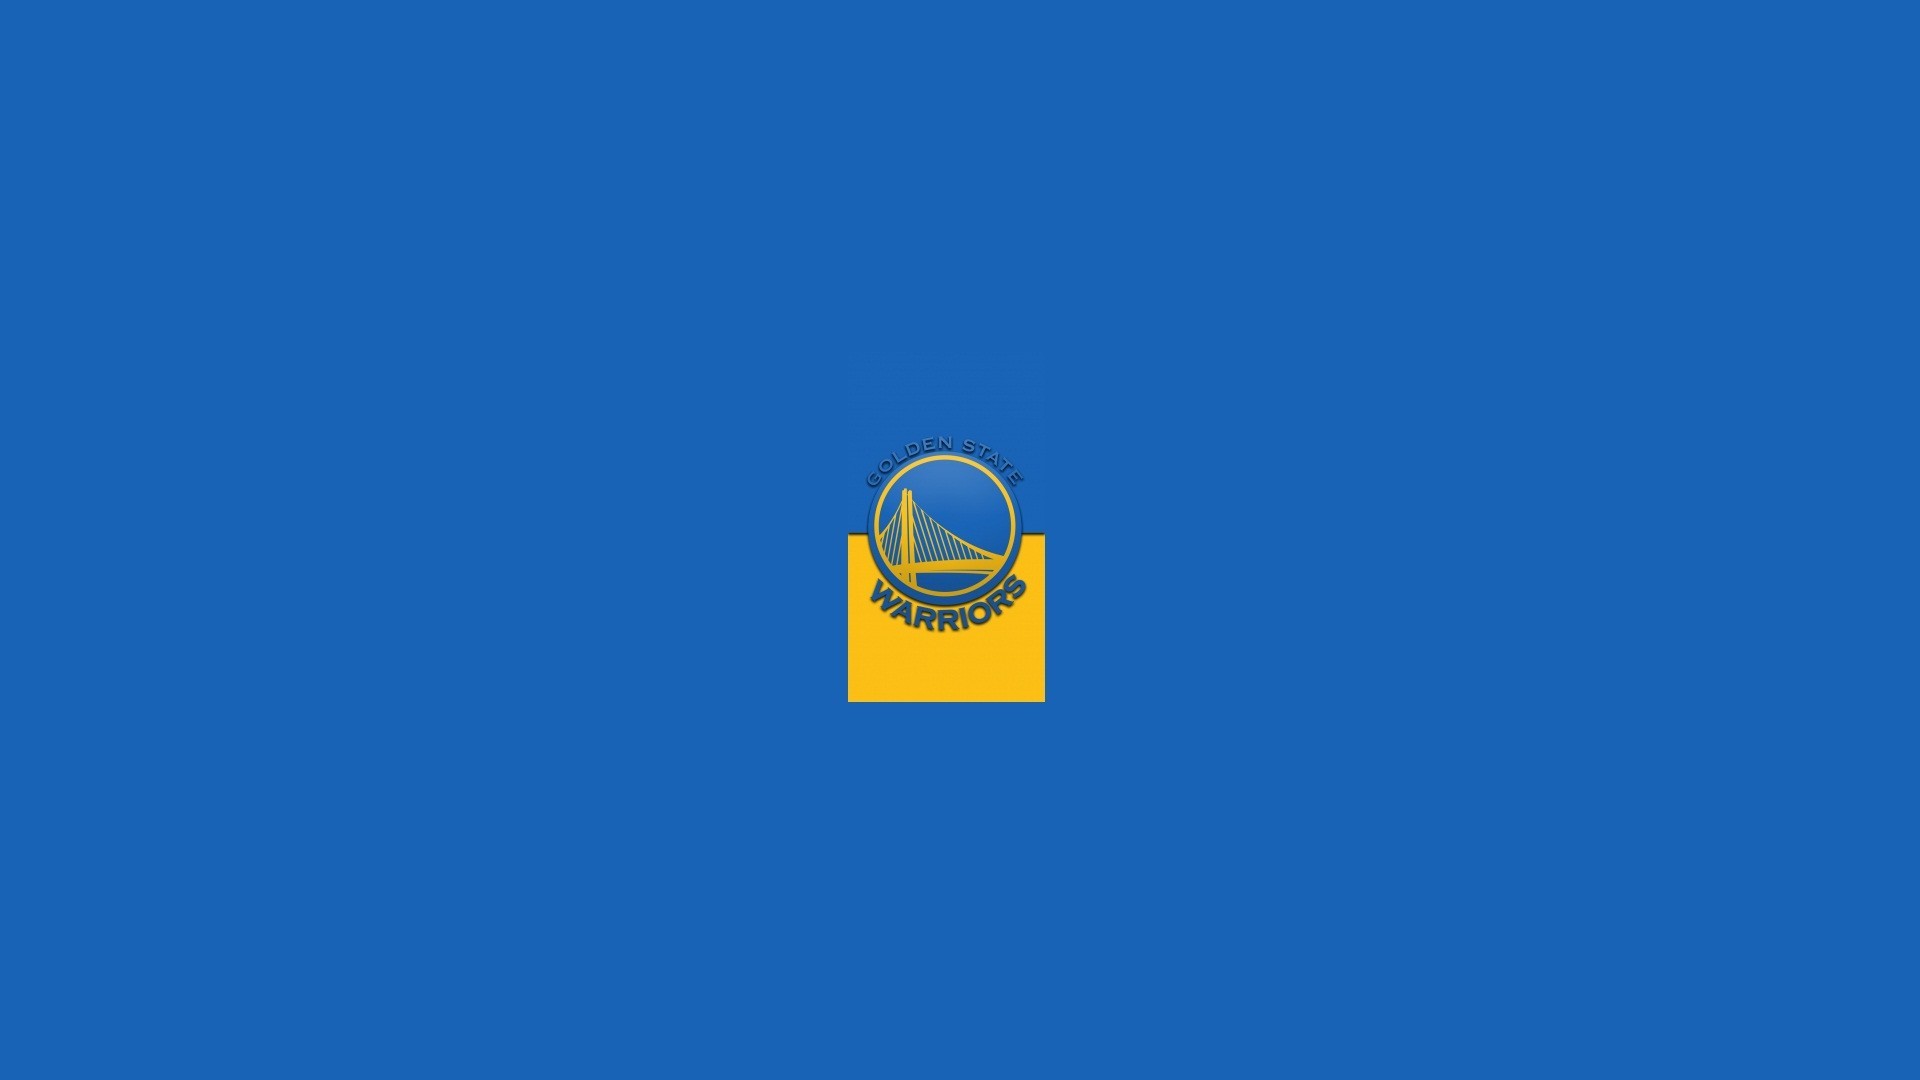 1920x1080 Golden State Warriors Logo Wallpaper HD with image dimensions   pixel. You can make this